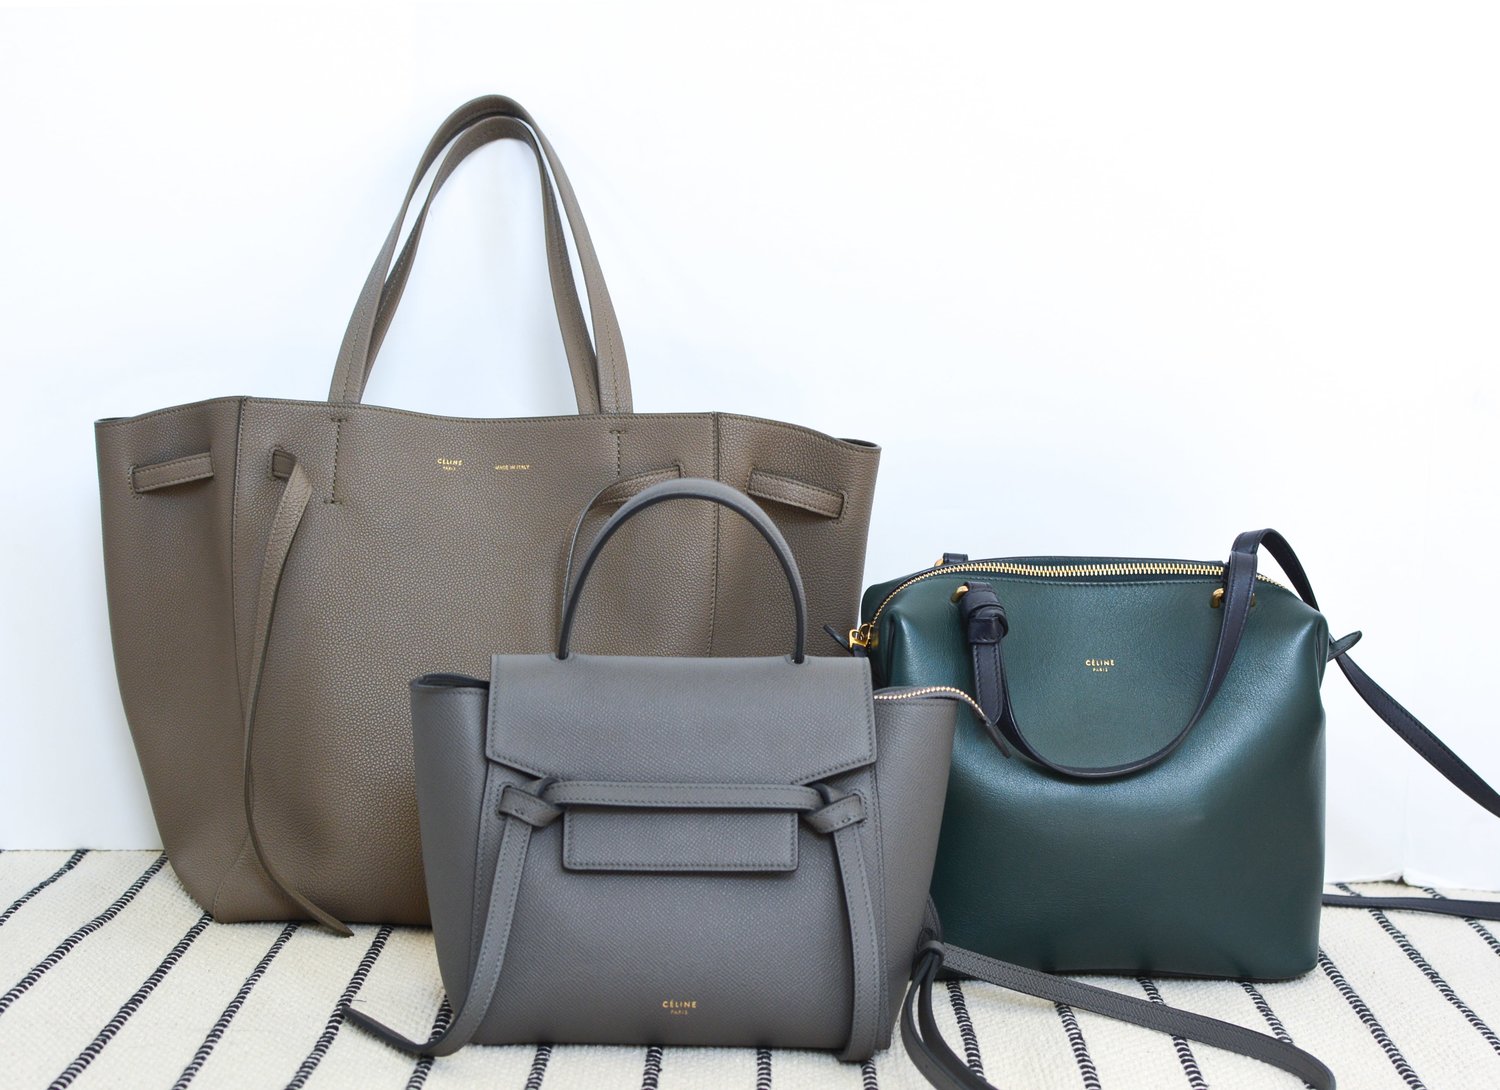 Where We Shop For Our Designer Bags + Collection Review - The